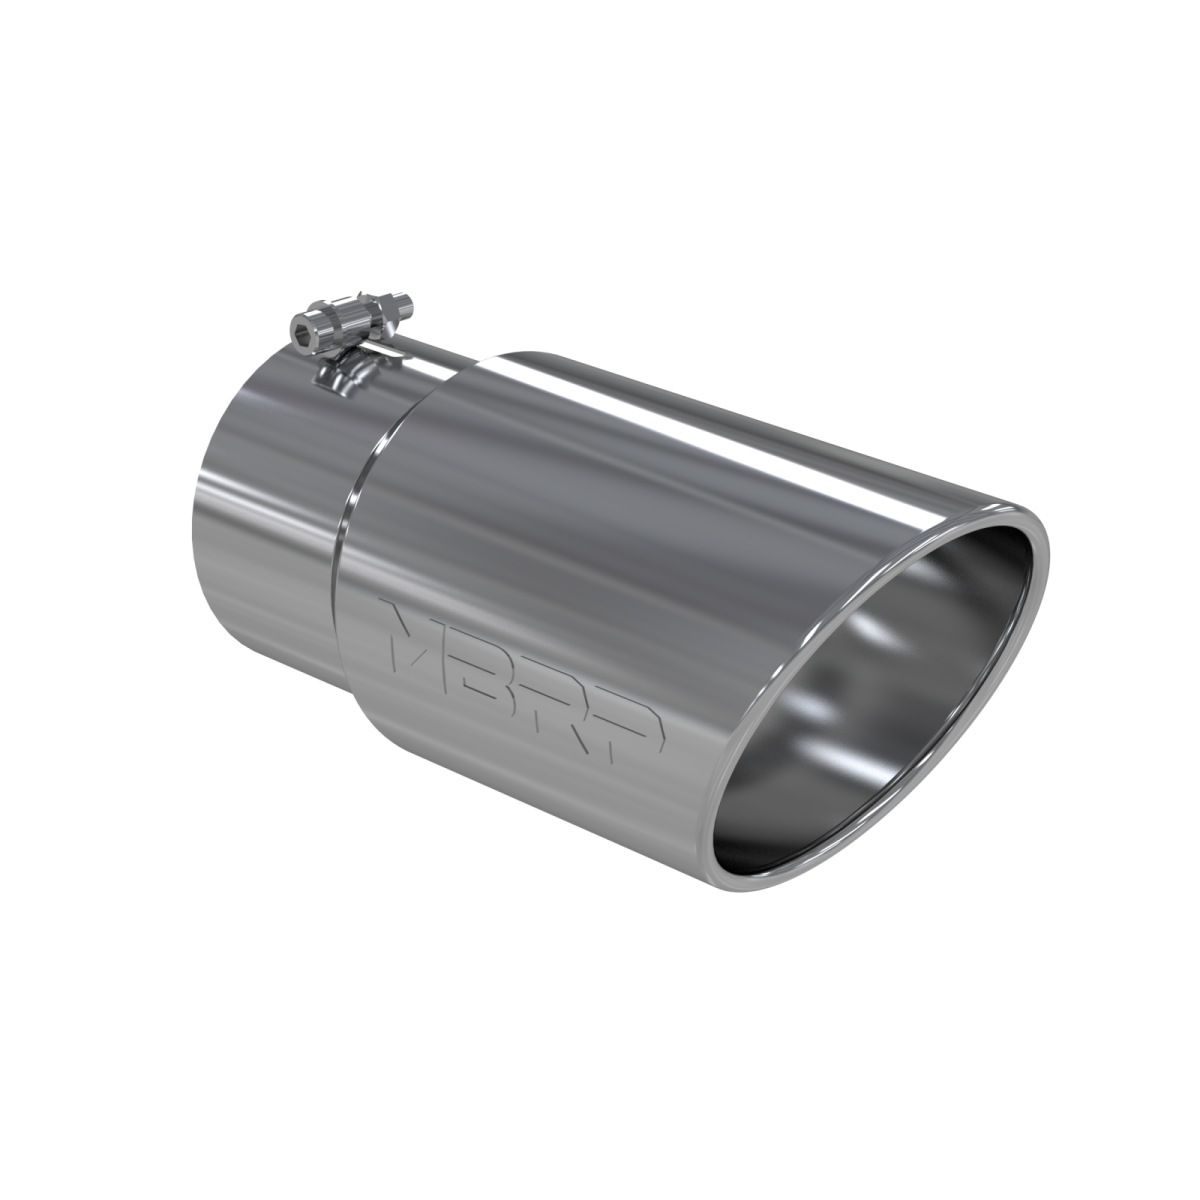 MBRP - MBRP Exhaust Tail Pipe Tip 6 Inch O.D. Angled Rolled End 5 Inch Inlet 12 Inch Length T304 Stainless Steel T5075